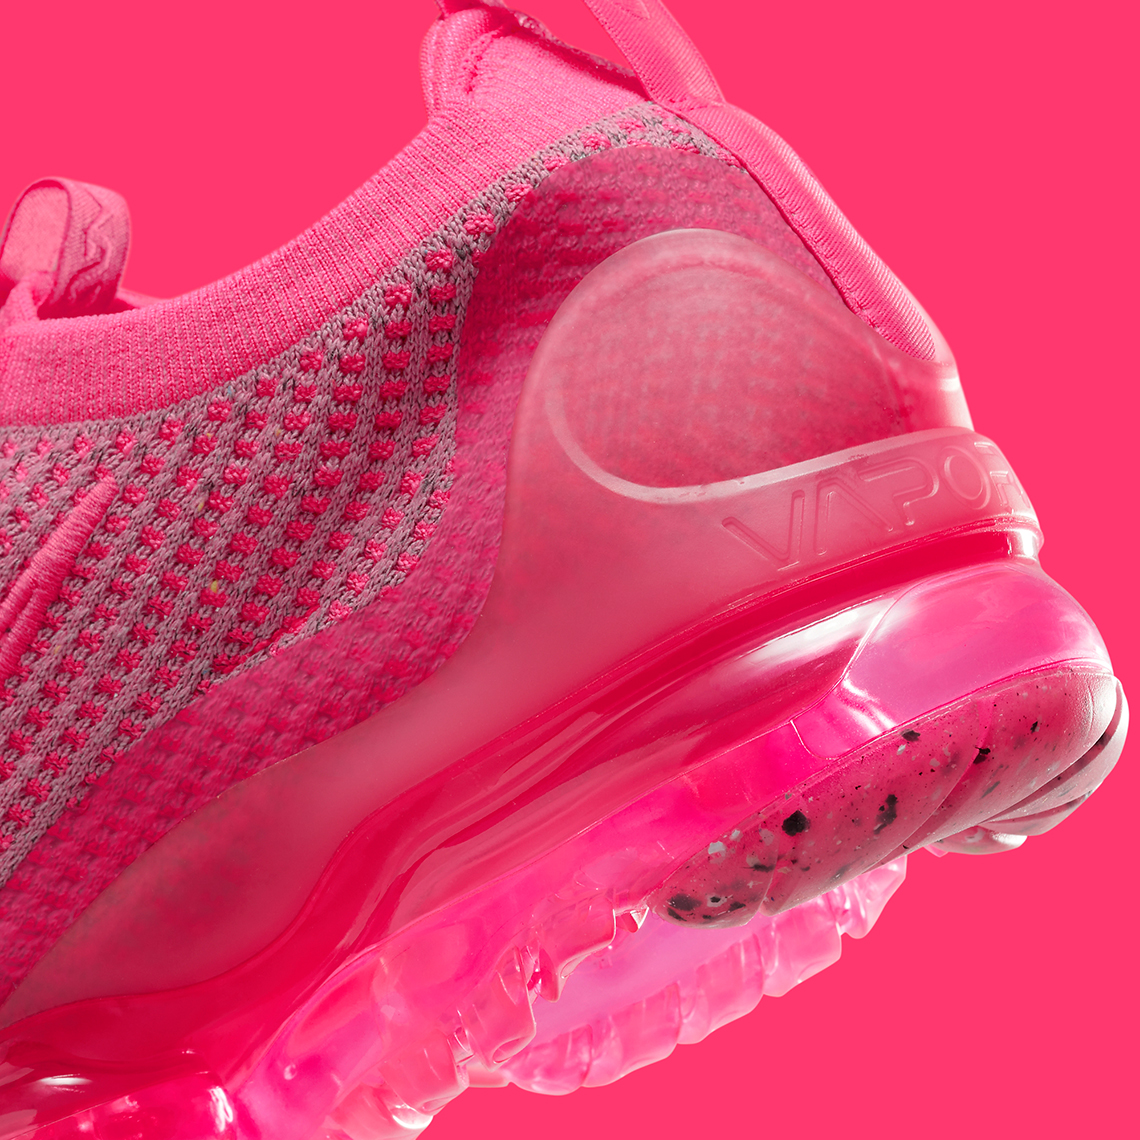 A Preview Of The Nike Air VaporMax Triple Pink